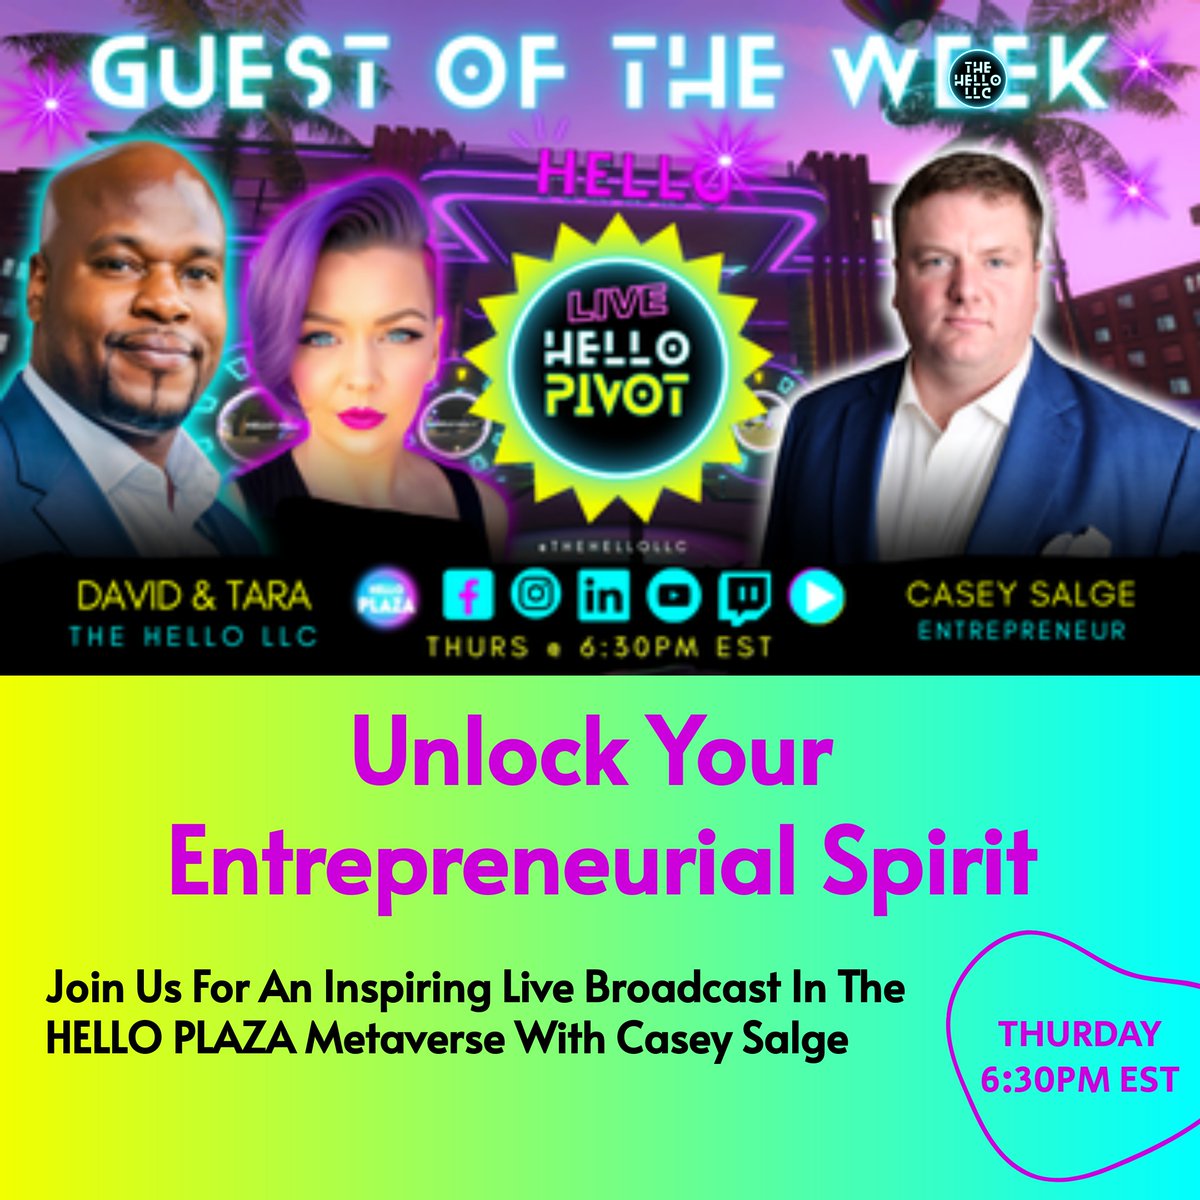 🌟 Don't miss our upcoming HELLO PIVOT LIVE BROADCAST event in THE HELLO PLAZA METAVERSE! 

Save the date: May 16th at 6:30 PM EST, as we welcome our special guest, Casey Salge! #GuestSpeaker #CaseySalge #EntrepreneurialLeadership